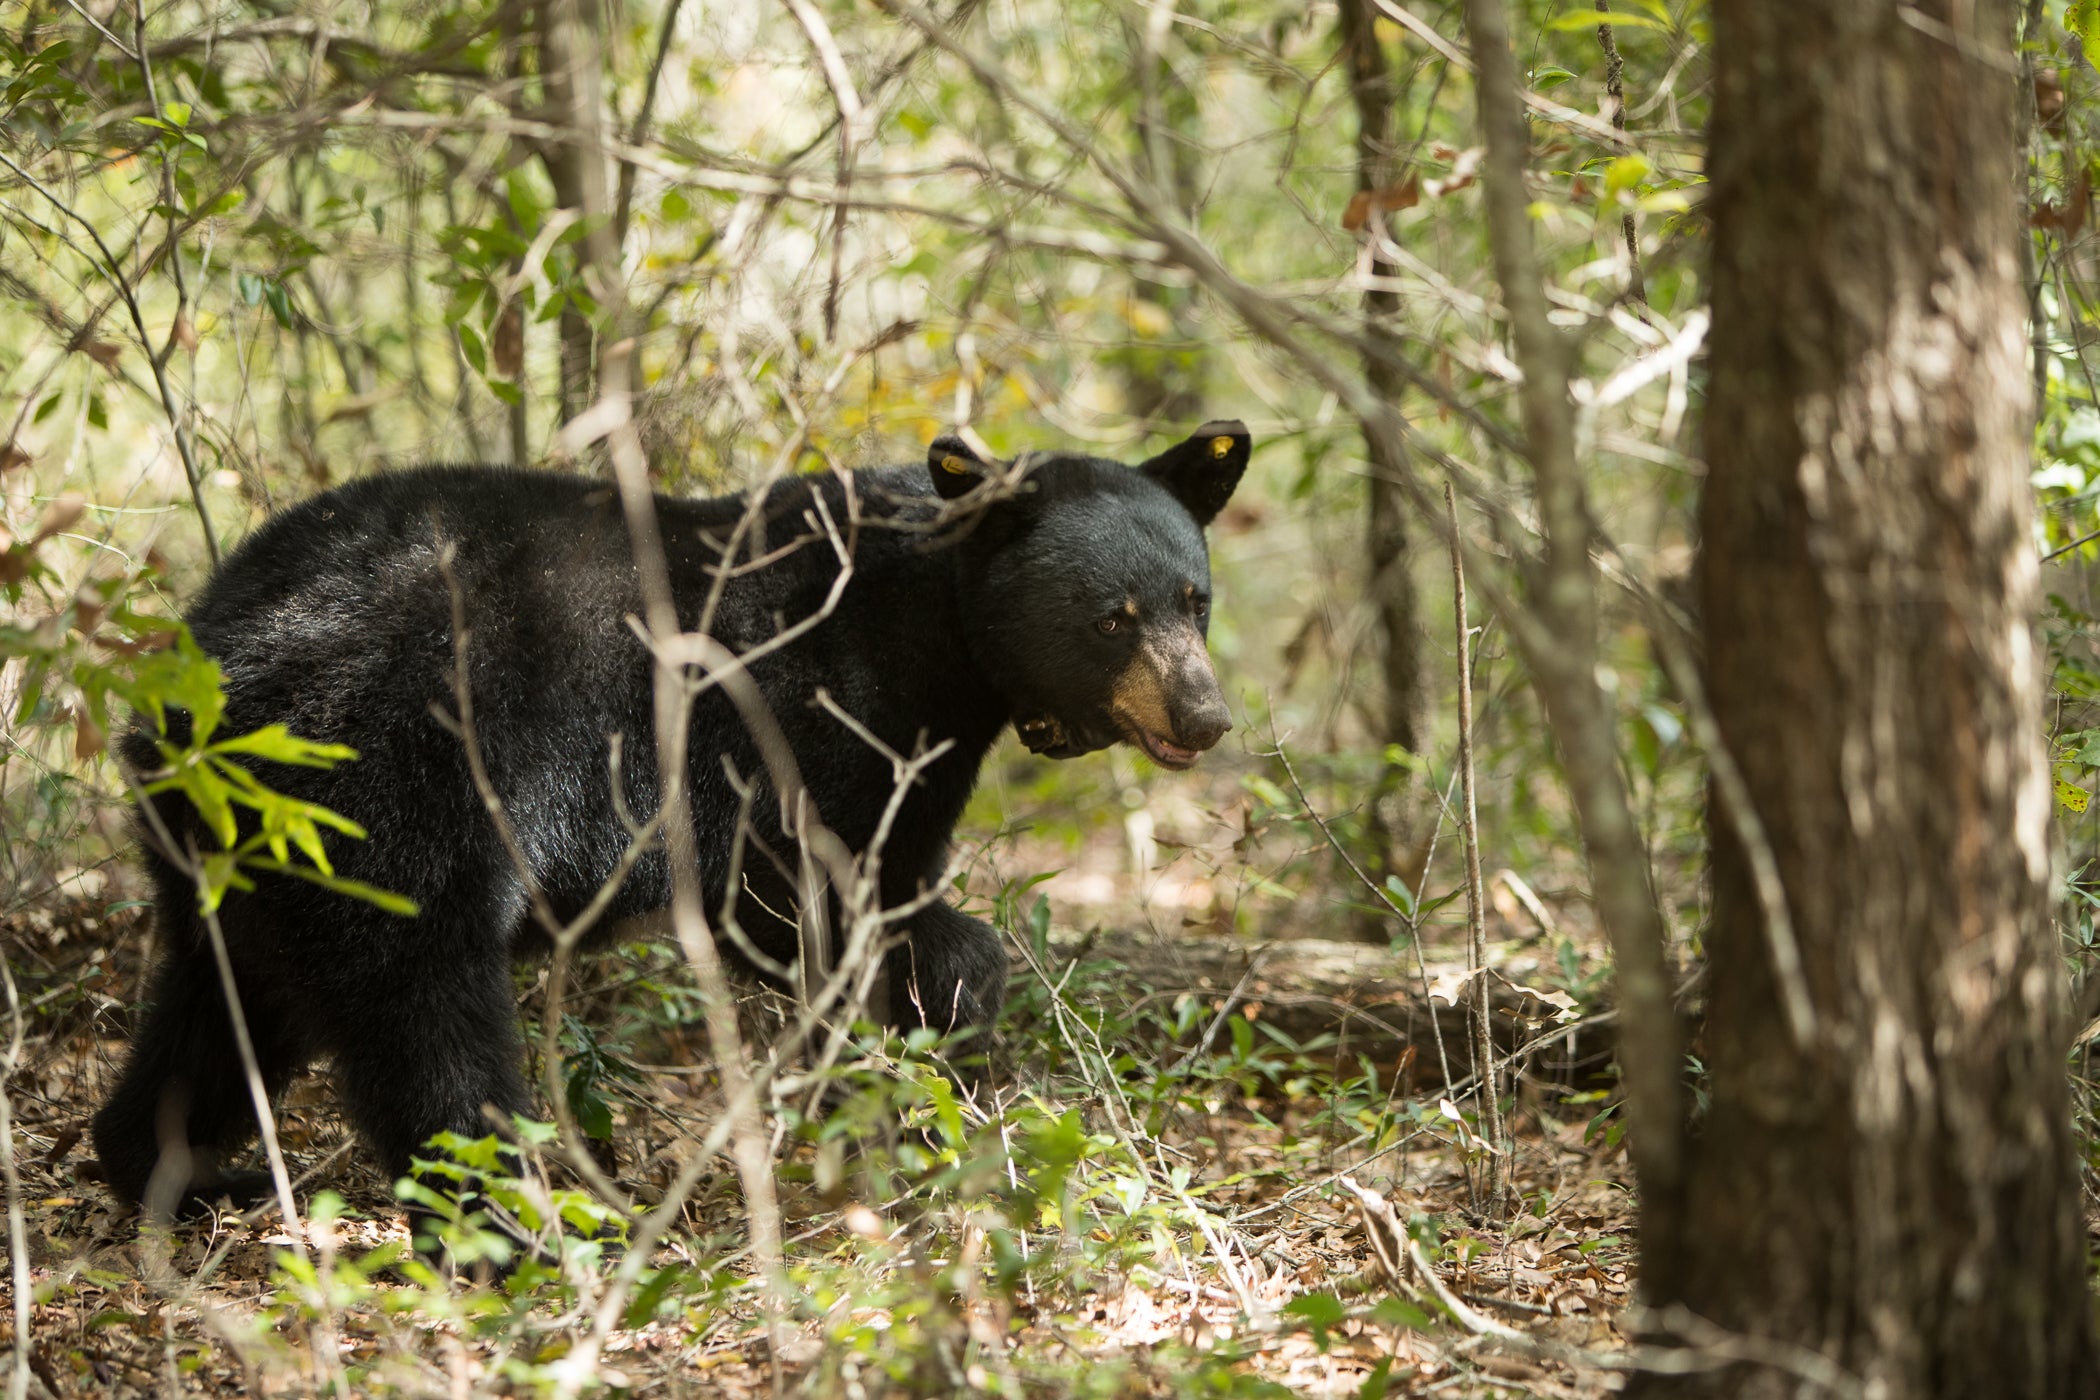 Photo by Billy Pope, ADCNR: WFF is currently working with Auburn University researchers and other state and federal agencies to collect data on the state’s black bear population and movements. This data will be used to make scientific decisions regarding bear management.